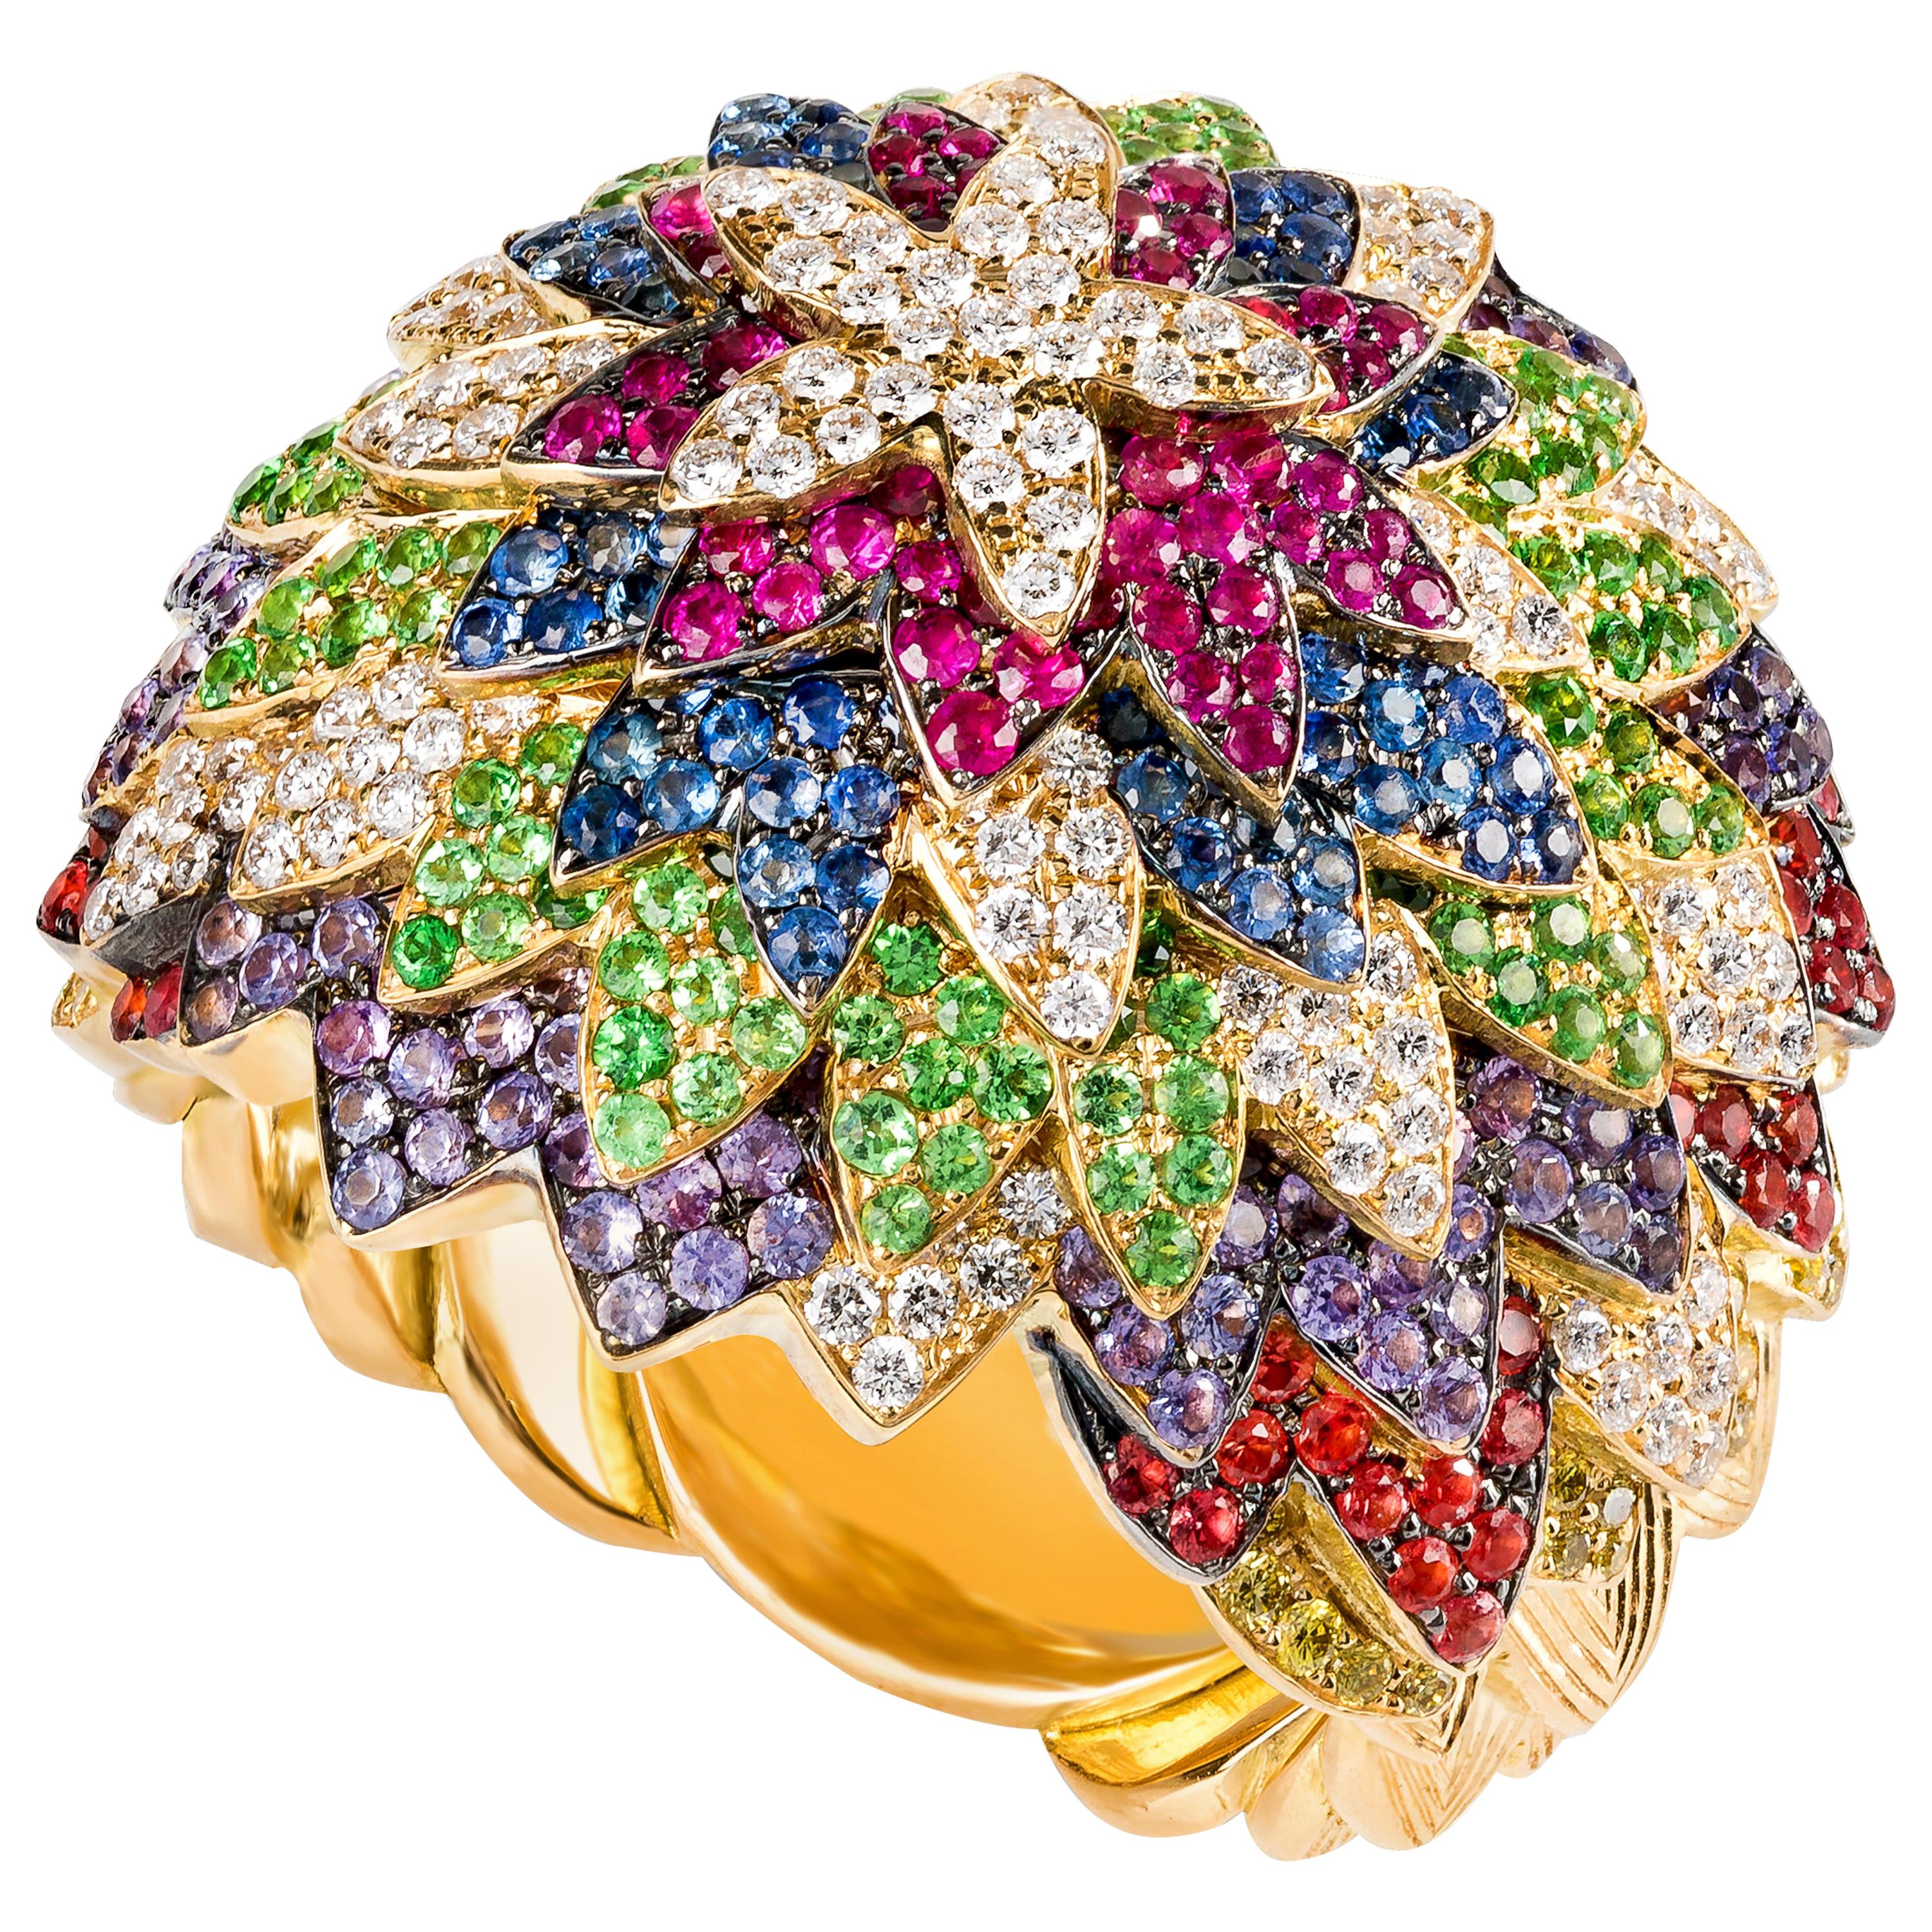 Rosior one-off Multi-Color Gemstone Cocktail Ring set in Yellow Gold